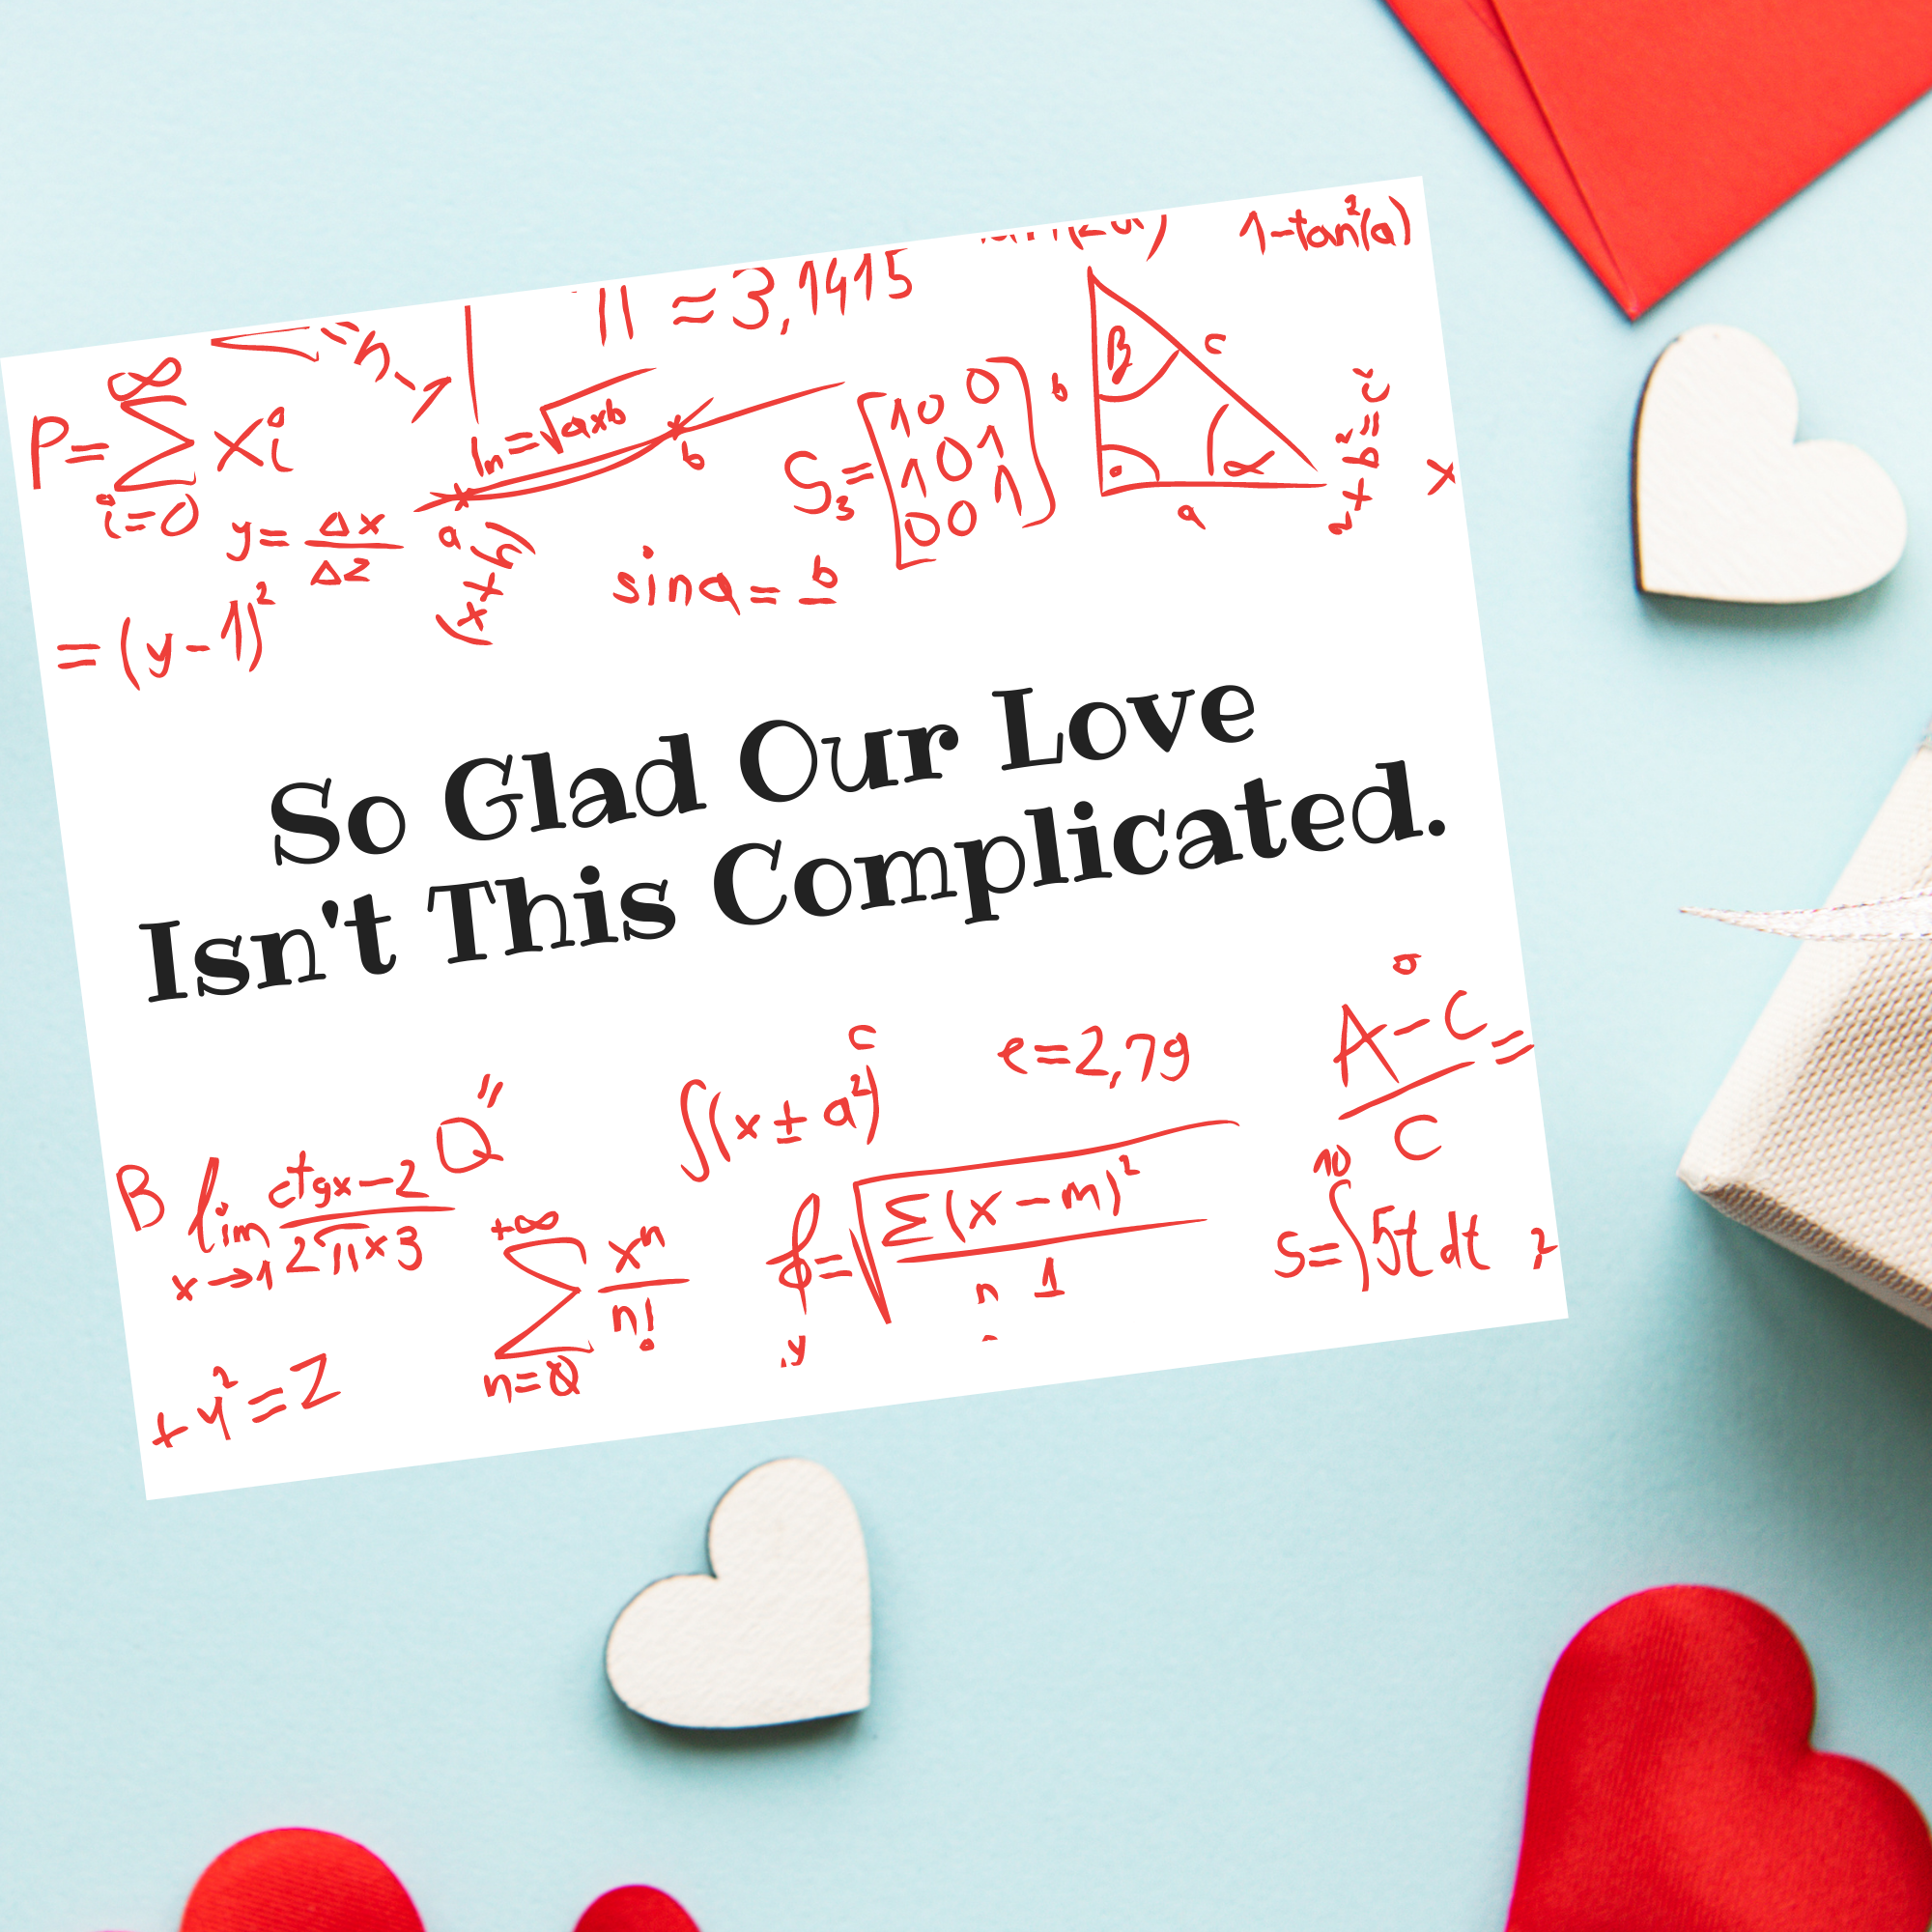 Uncomplicated Love Valentine's Day card